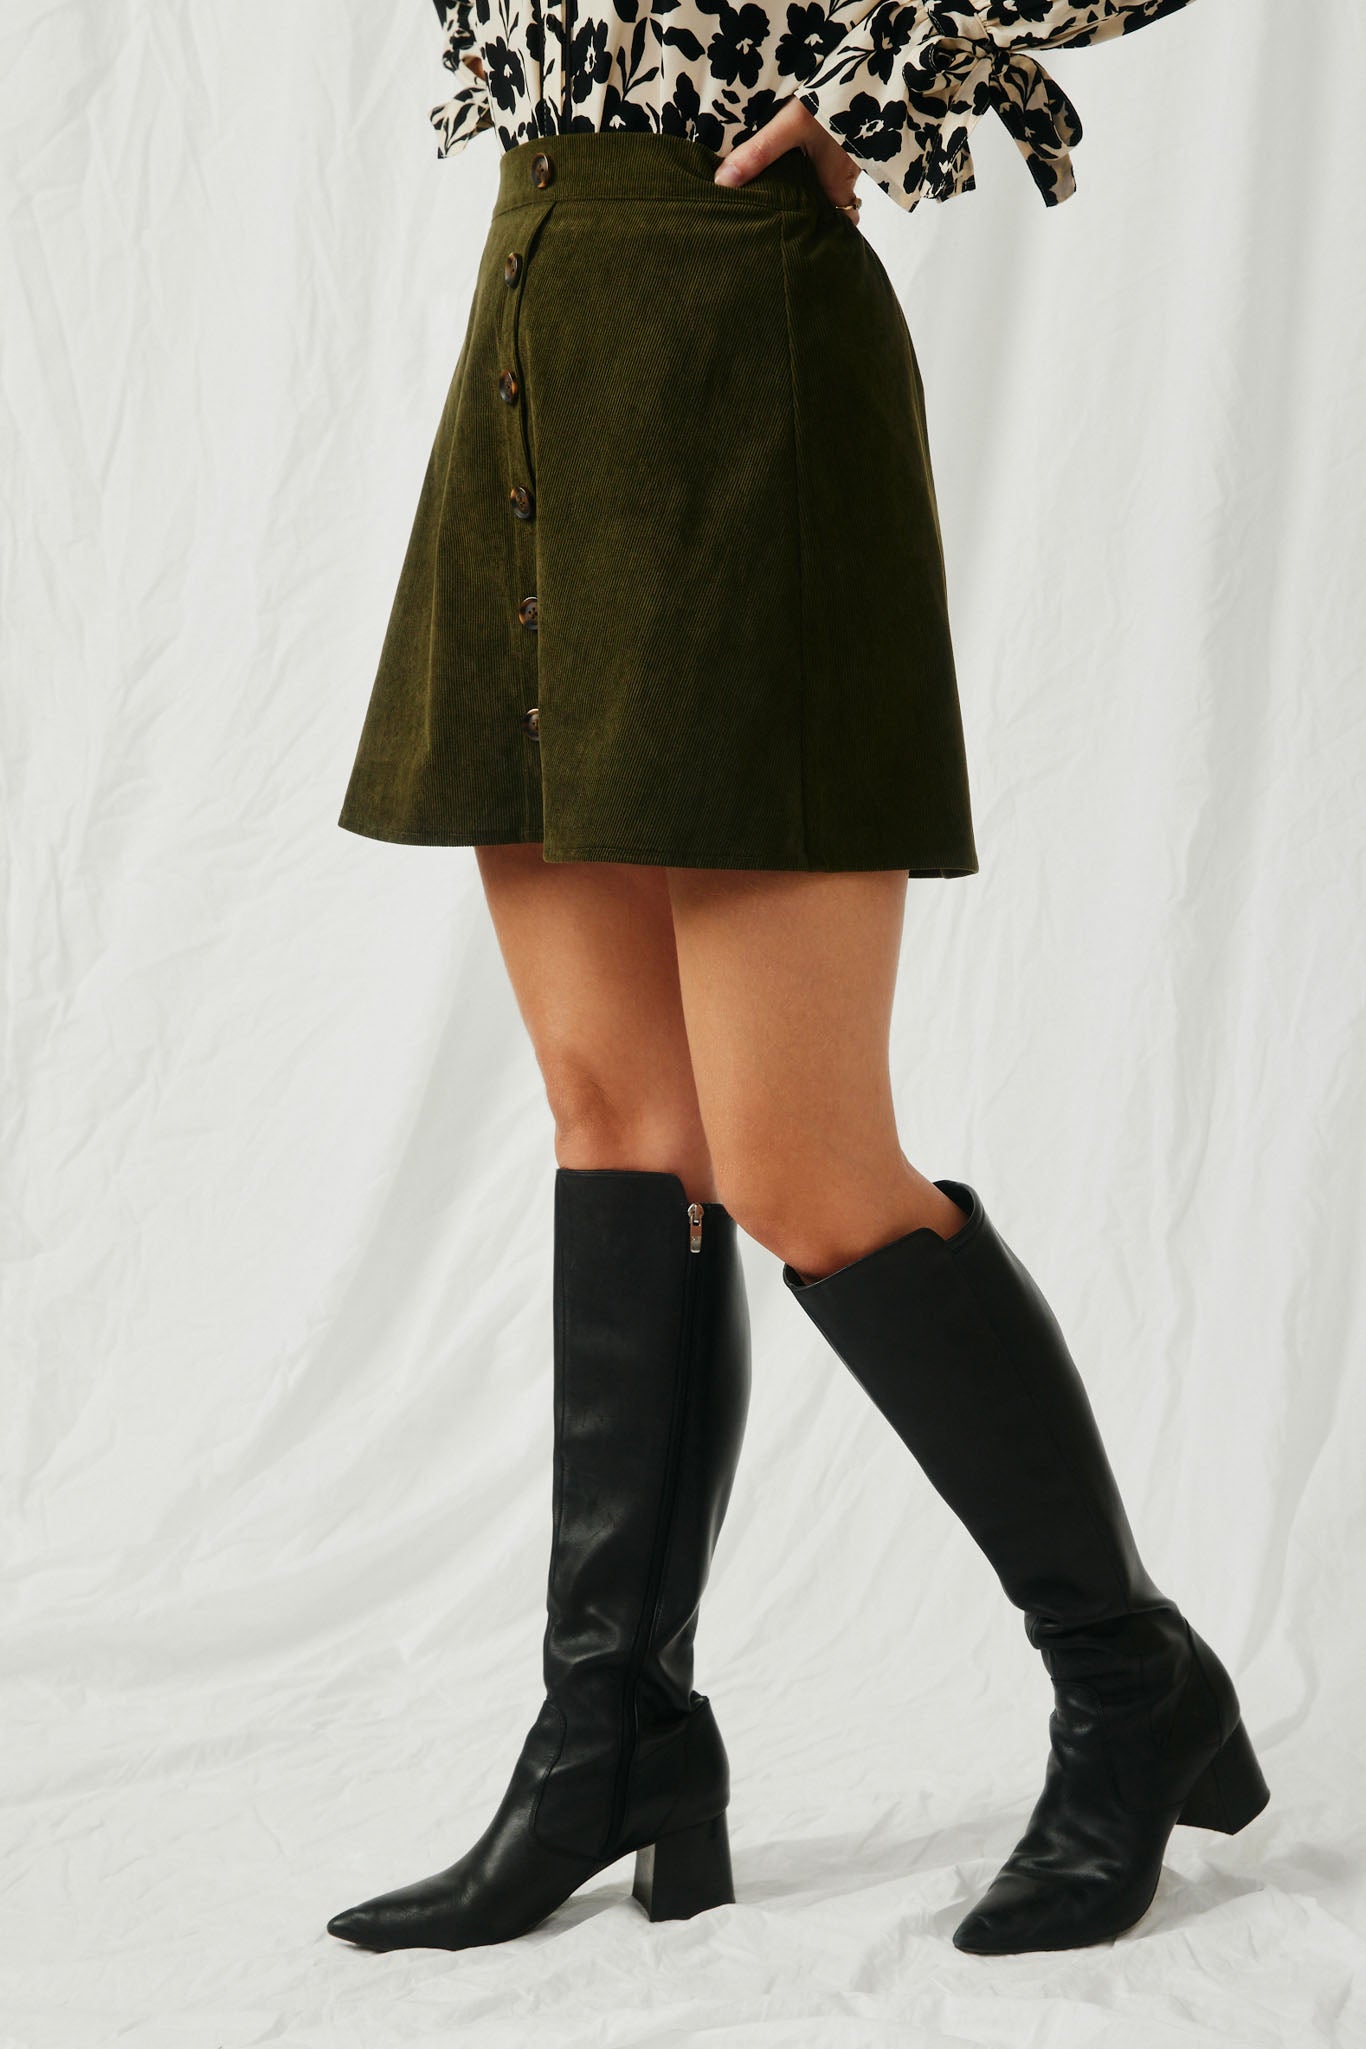 HY5306 Olive Womens Button Front Suede Flare Skirt Side